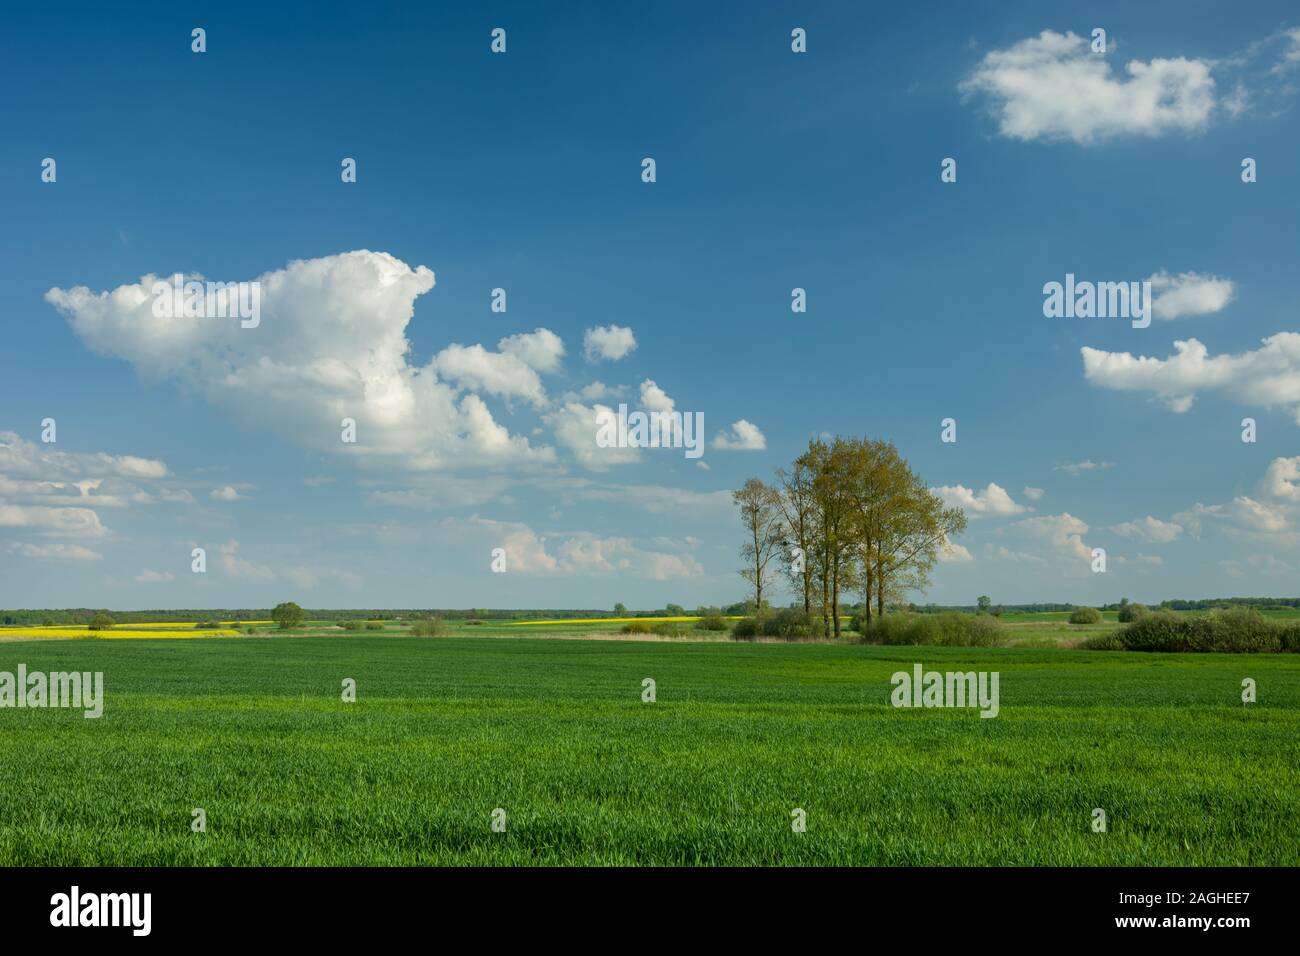 Green field and tall trees on the horizon Stock Photo